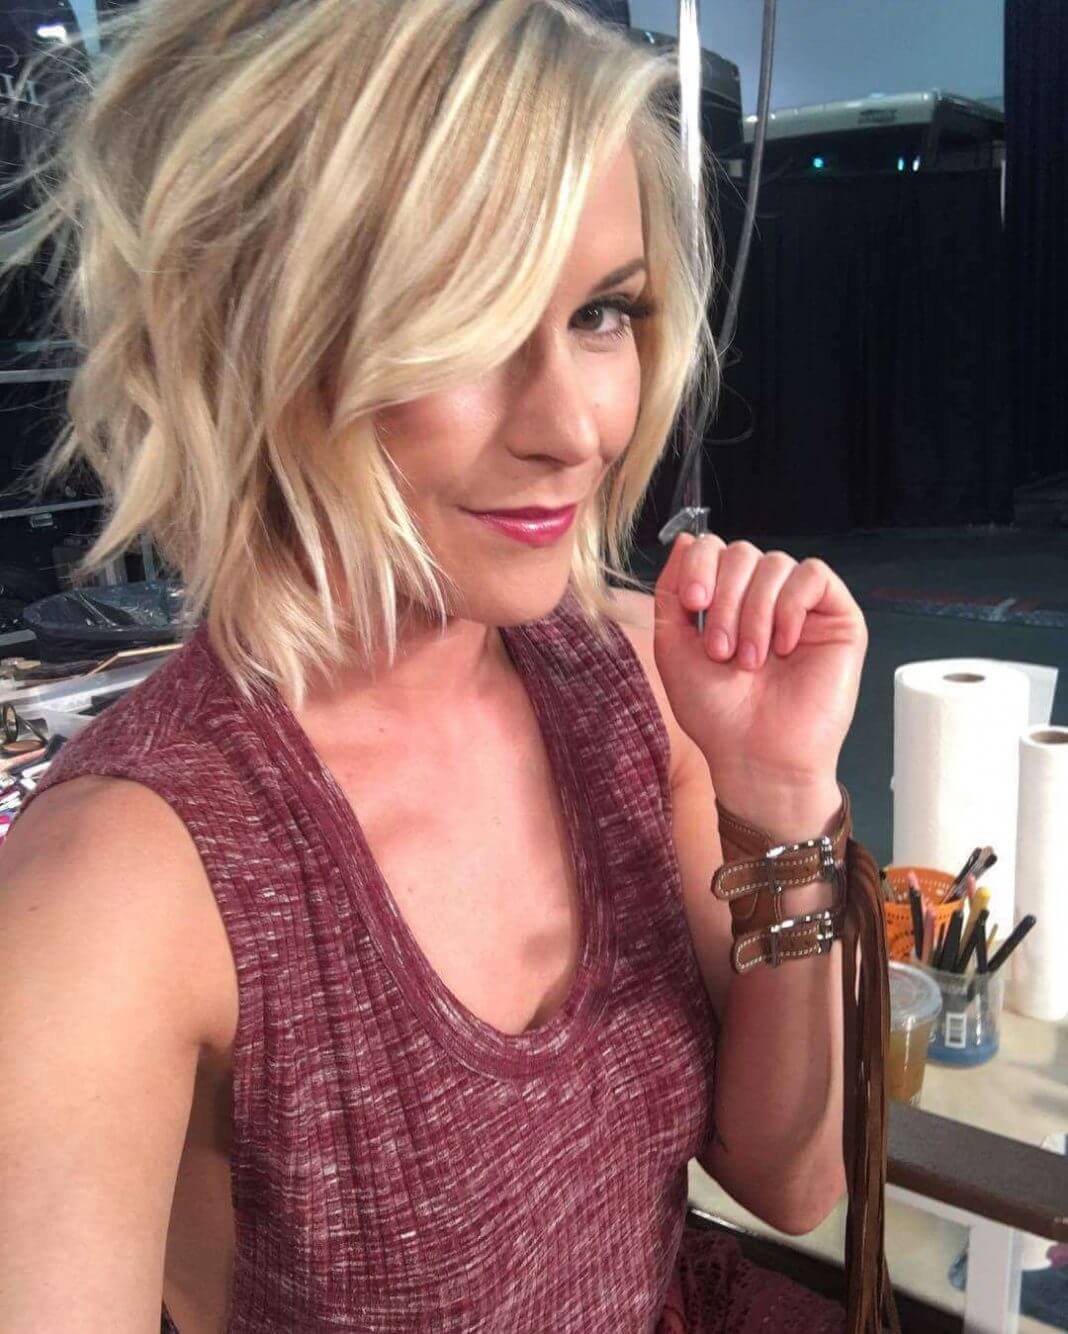 49 Renee Young Nude Pictures Present Her Polarizing Appeal 17